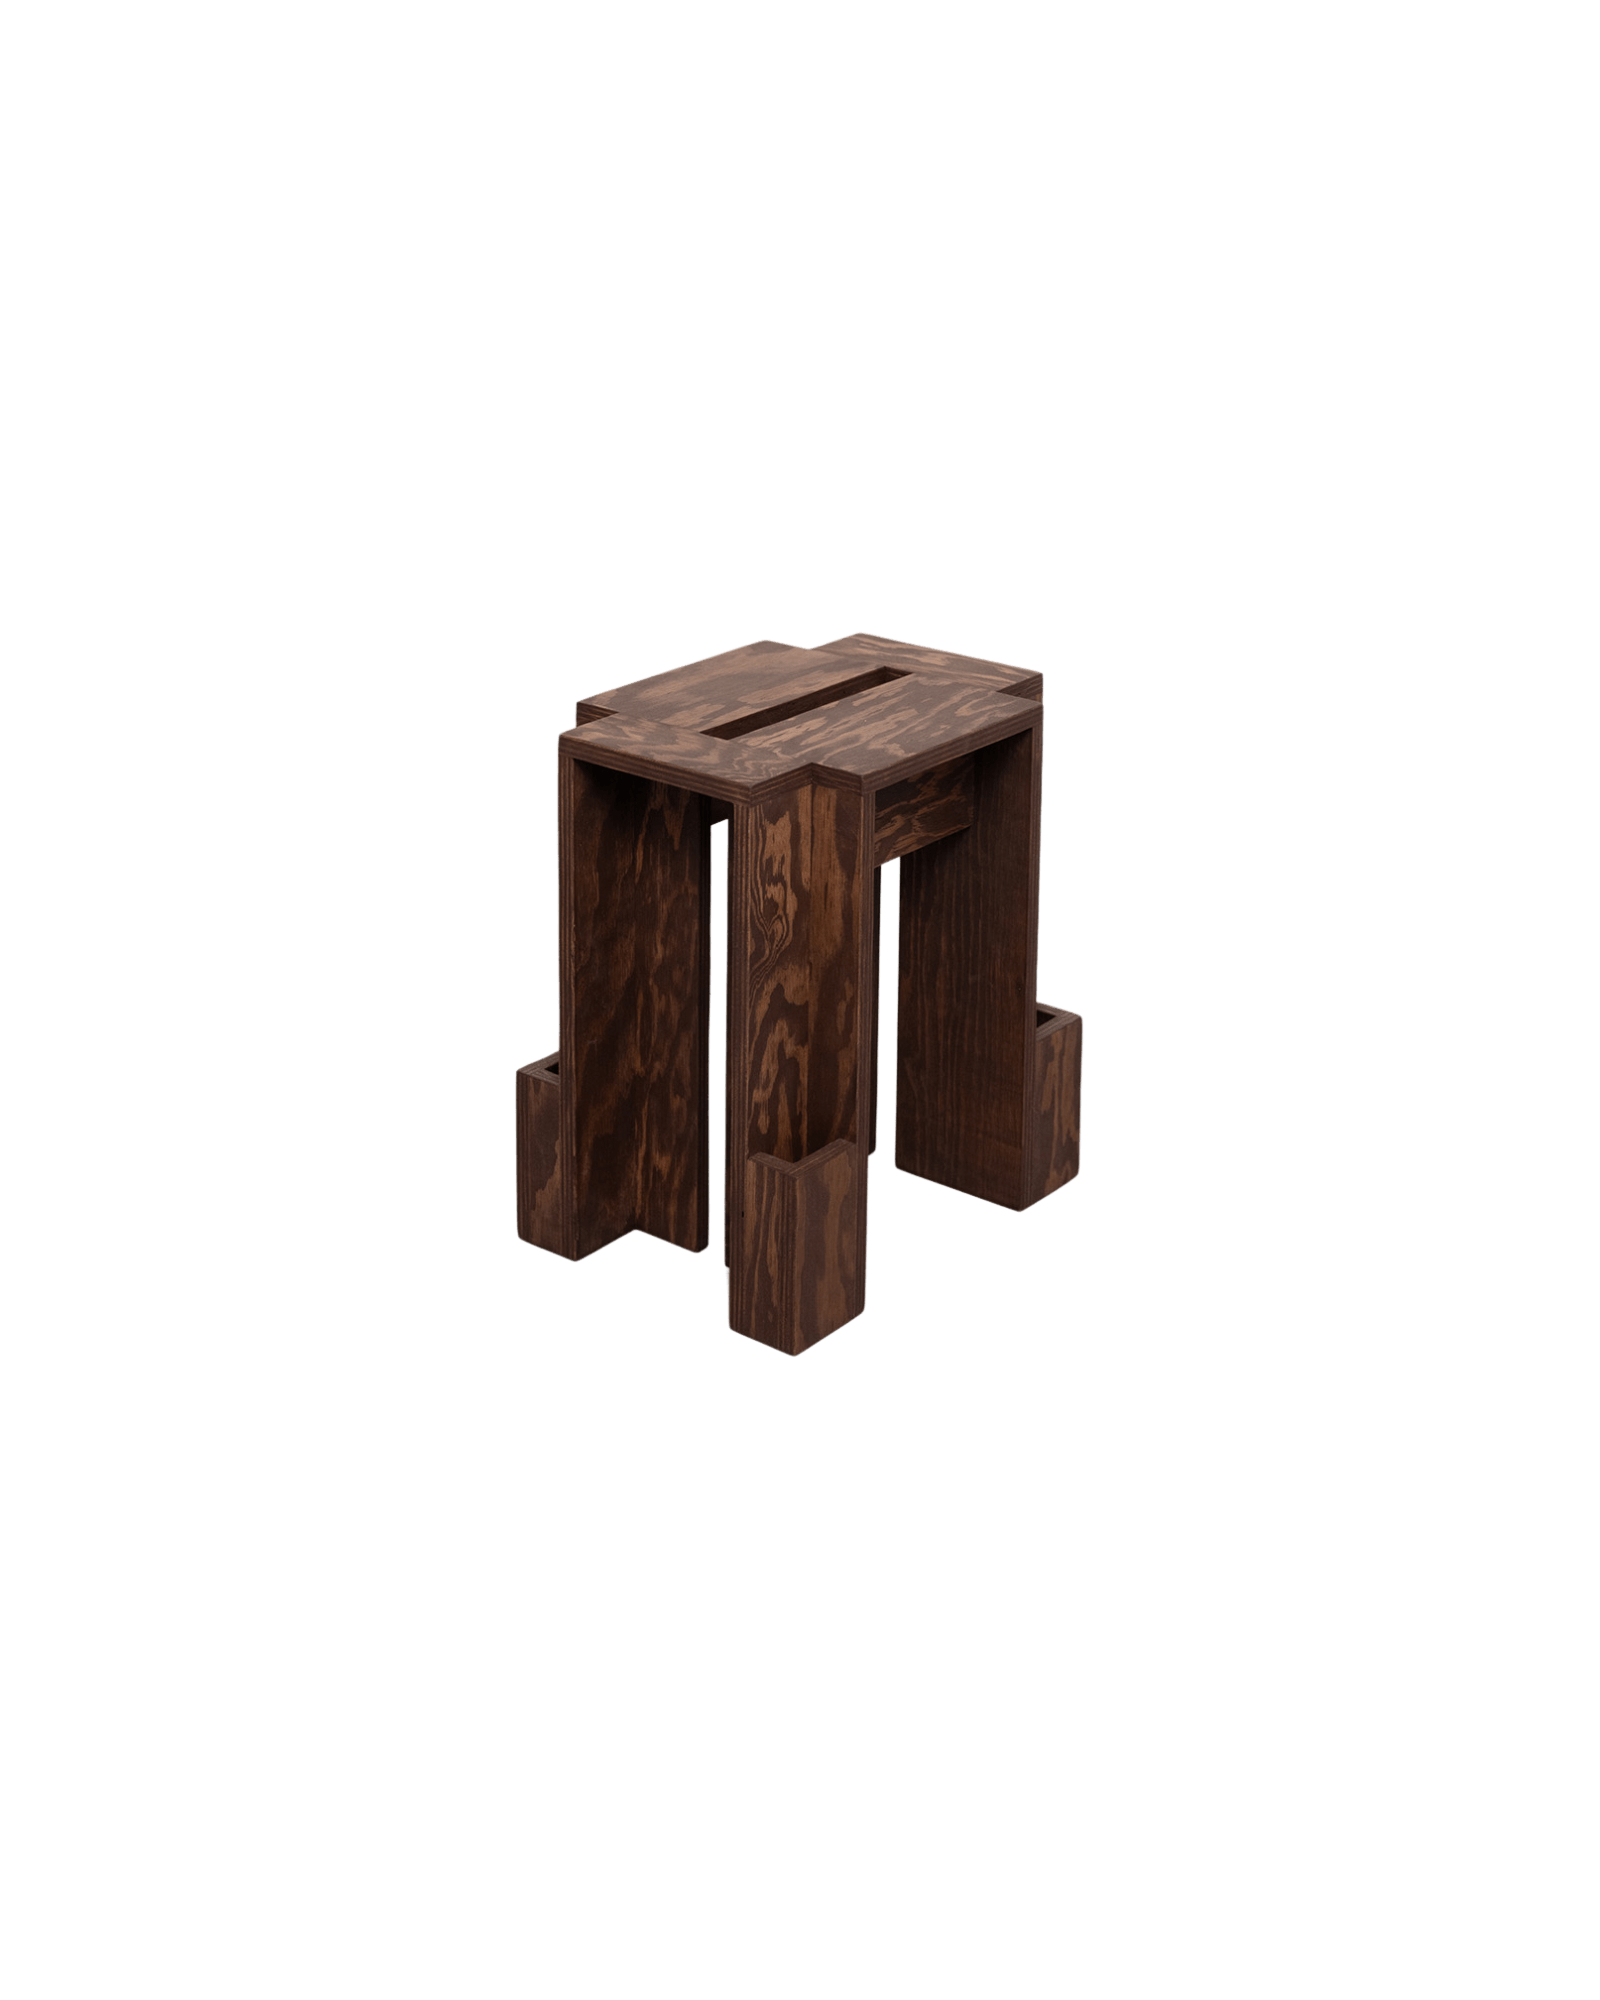 Fortress stool, Fortress, Wendy Andreu